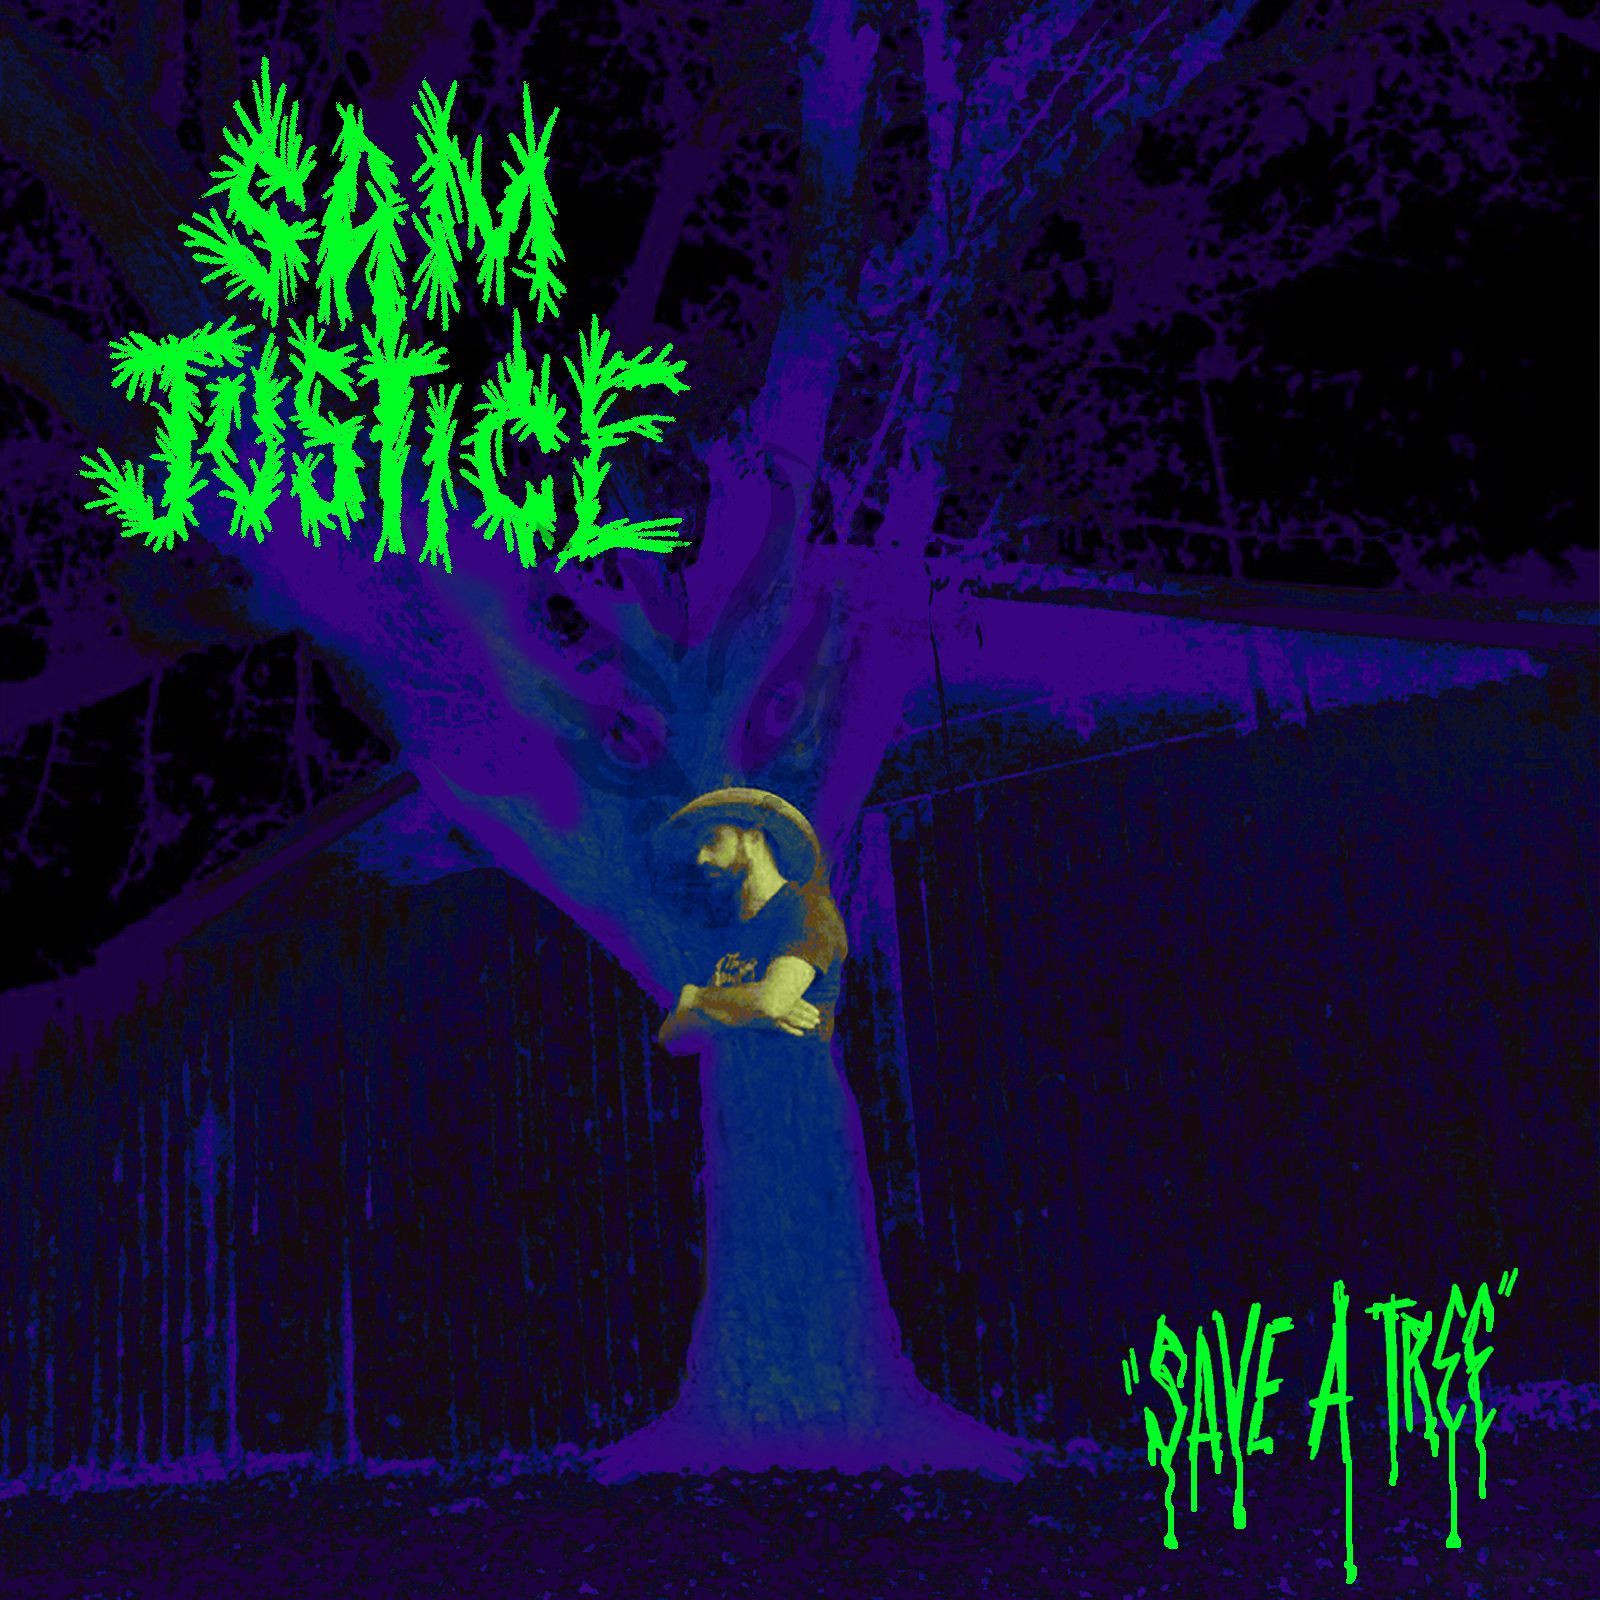 Sam Justice Save a Tree available now!